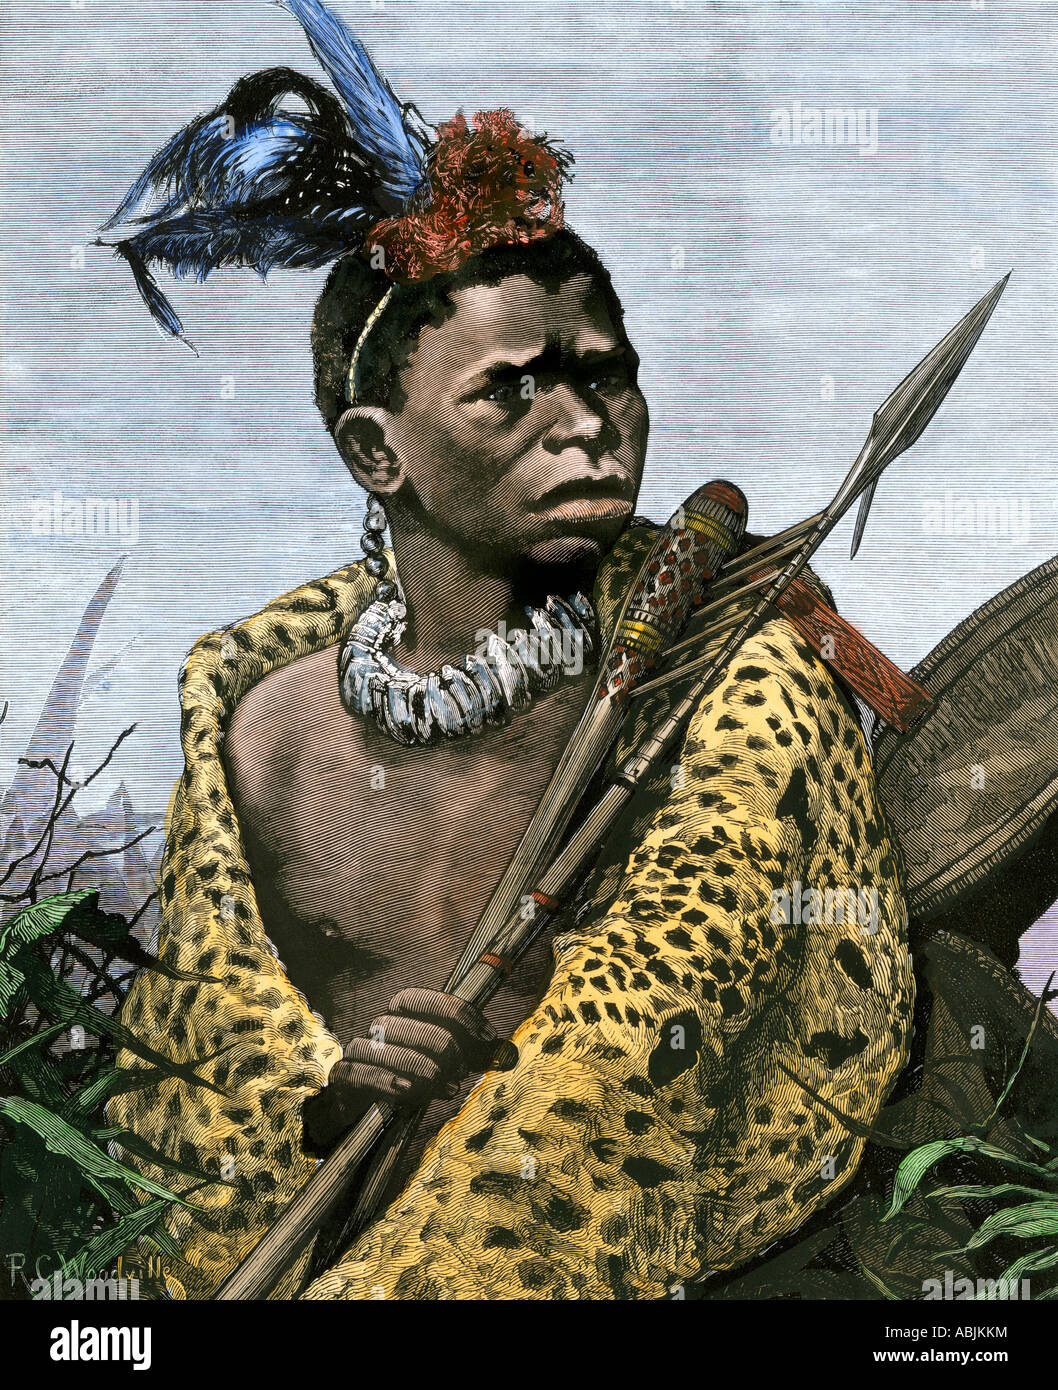 Young Zulu chief in South Africa 1870s. Hand-colored woodcut Stock Photo